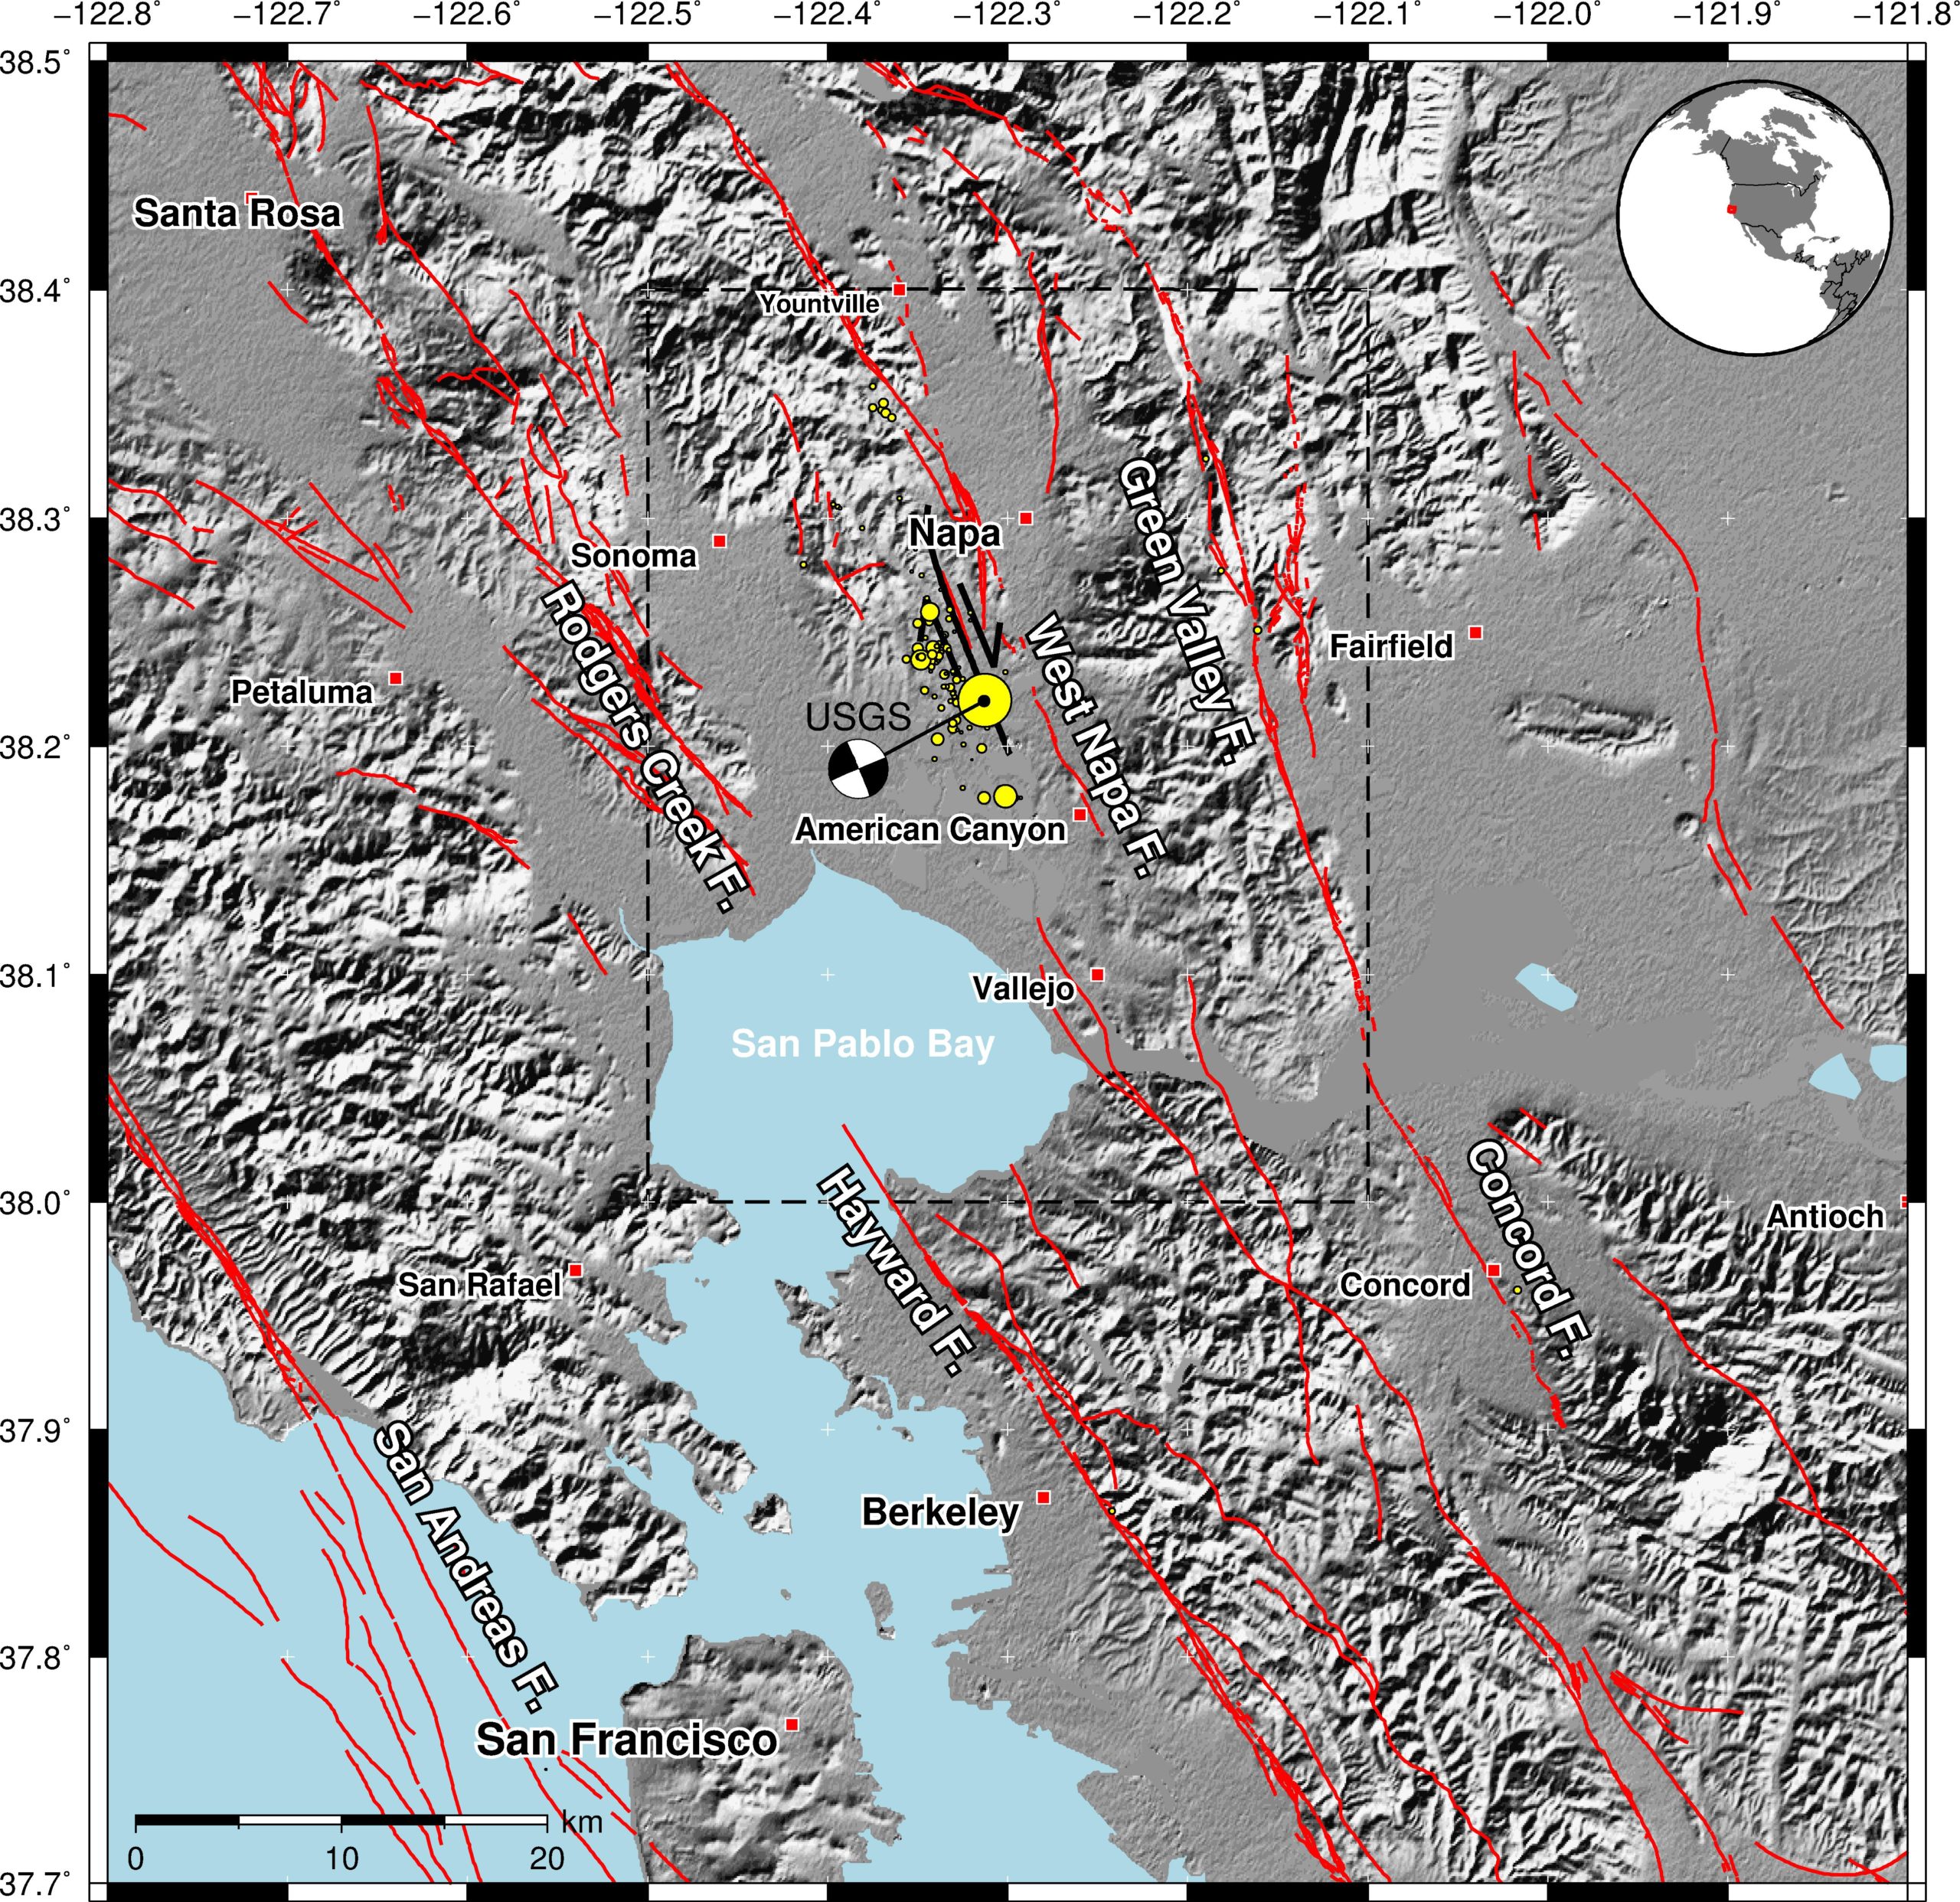 Fault map of the San Francisco Bay Area with faults in red colour. The fault rupture is shown by the black line, south-west of Napa (mapped by UC Davis scientists). The mainshock and smaller aftershocks are denoted by the yellow circles. Earthquake locations and existing fault locations sourced from USGS. Source: Earthquakes without frontiers.